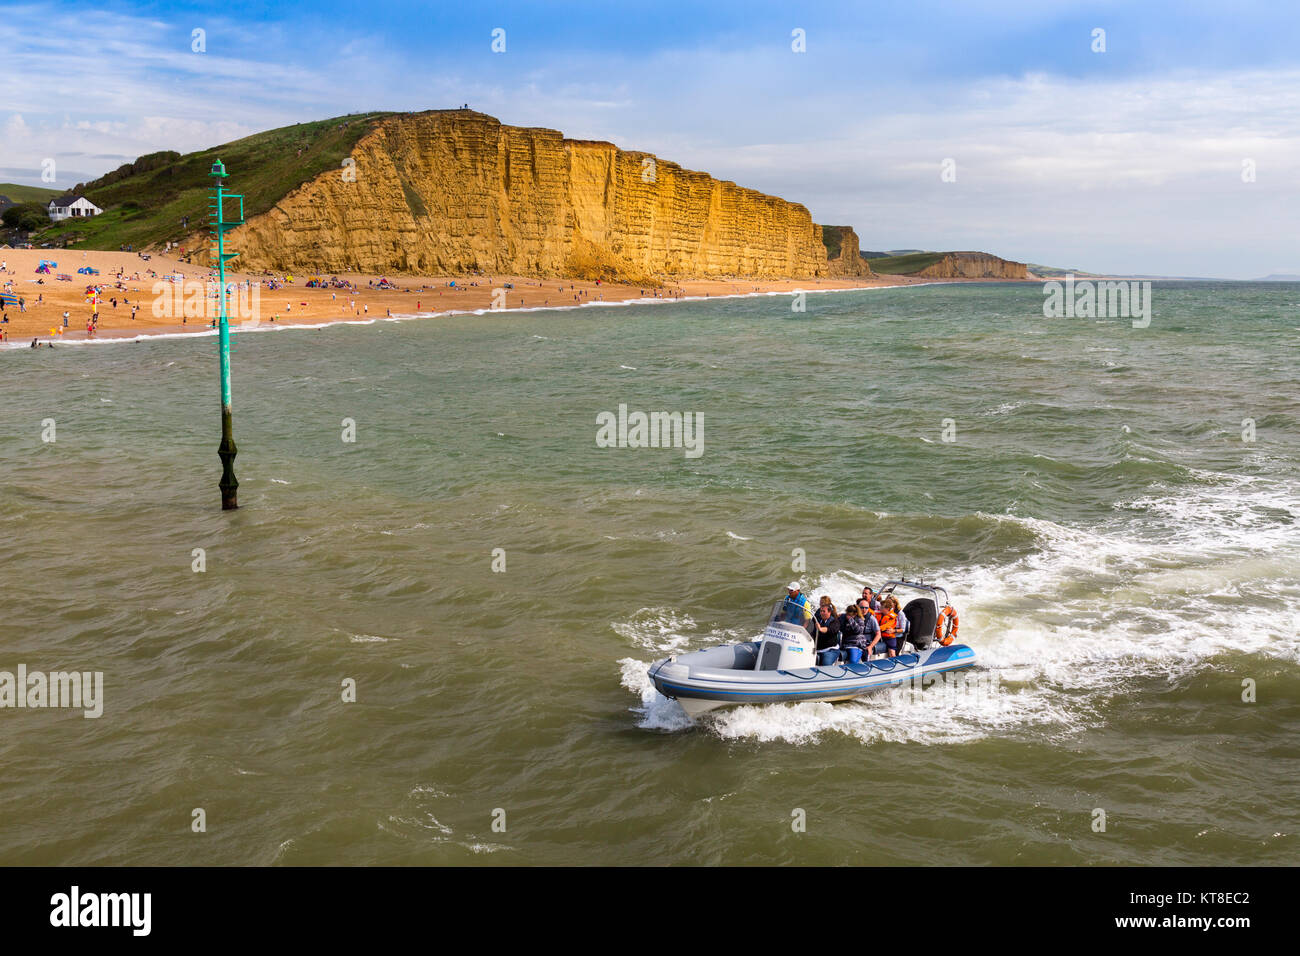 An inflatable rib full of tourists approaches the entrance to West Bay harbour in front of East Cliff on the Jurassic Coast, Dorset, England, UK Stock Photo